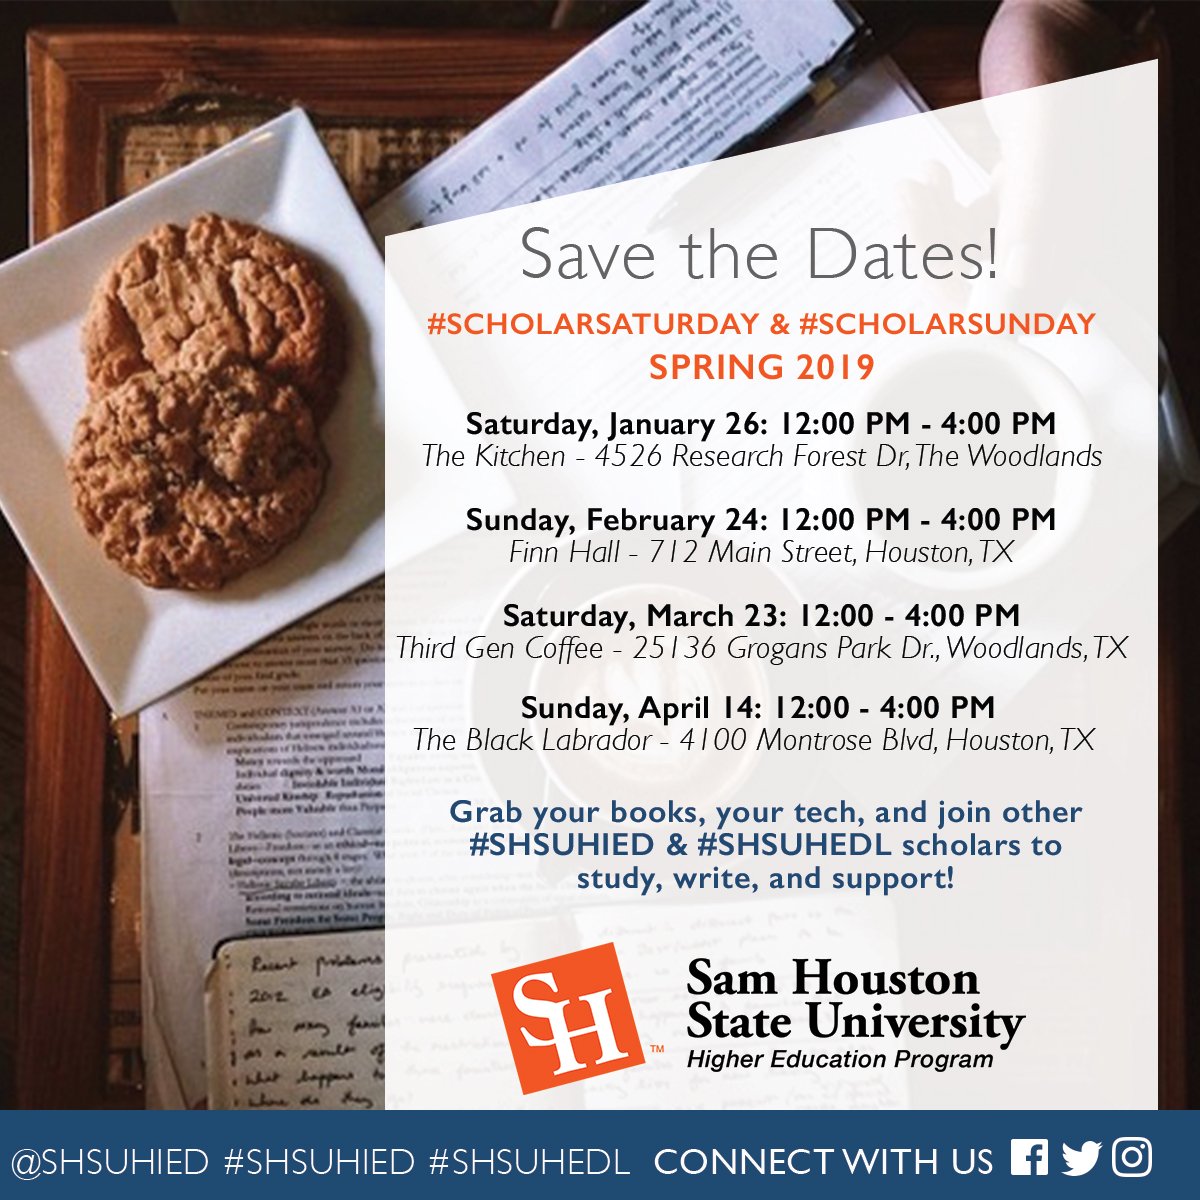 Attention all Houston area #SHSUHIED #SHSUHEDL scholars! Join us for one or all of our Spring Scholar Weekend Days. These are great opportunities to study and be in community with fellow Bearkat scholars! #SHSUCOE #SHSU @SHSUOnline @SHSUCOE